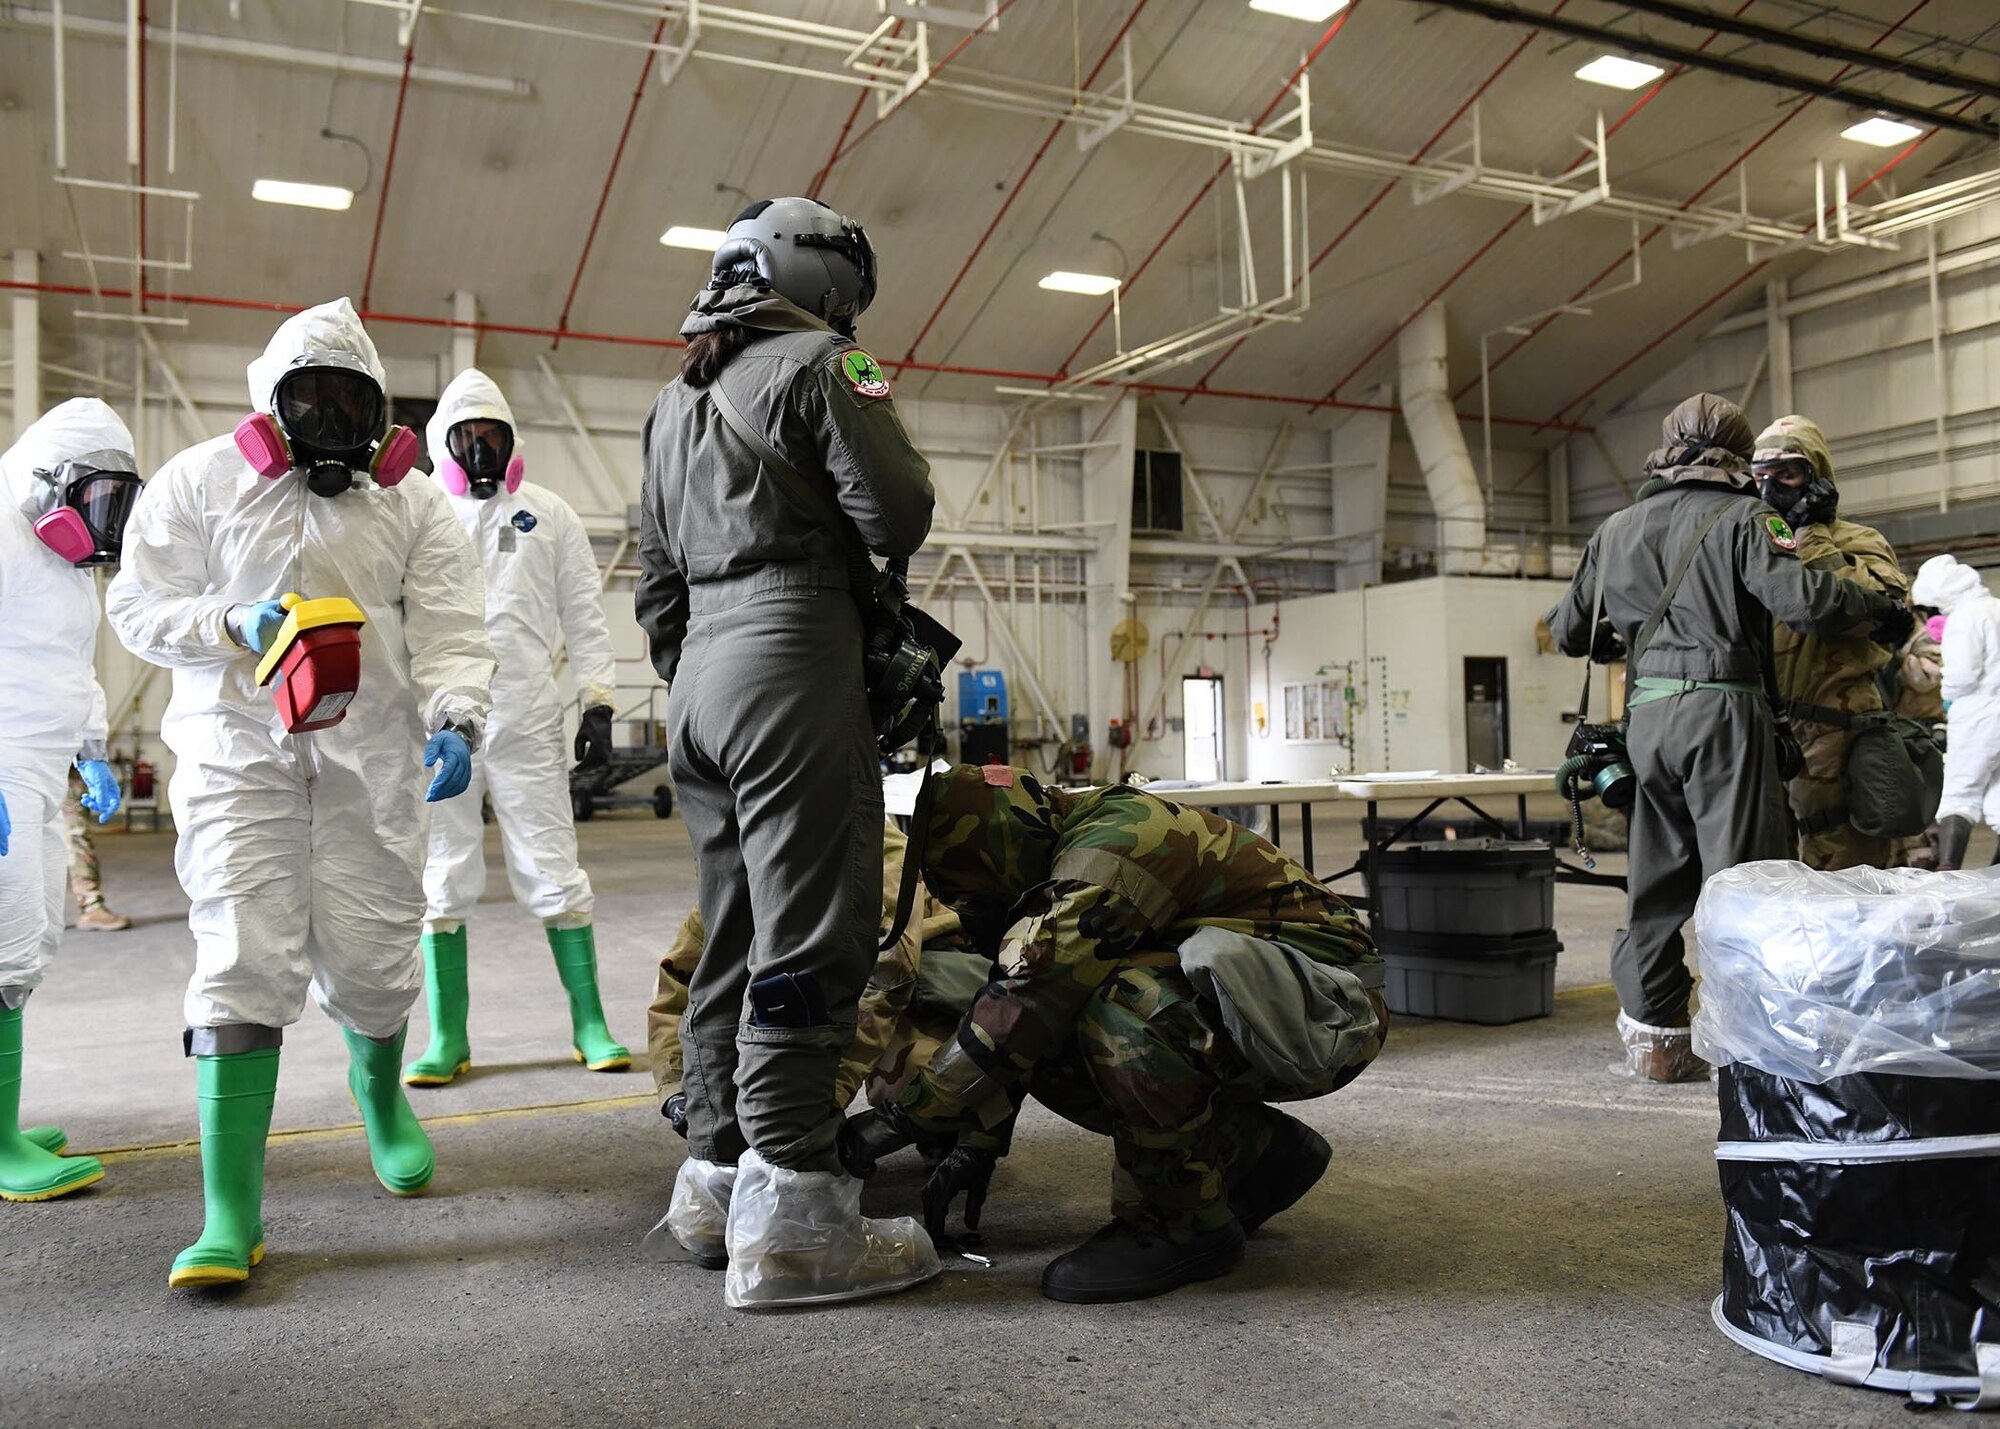 Airmen during in a simulated decontamination line